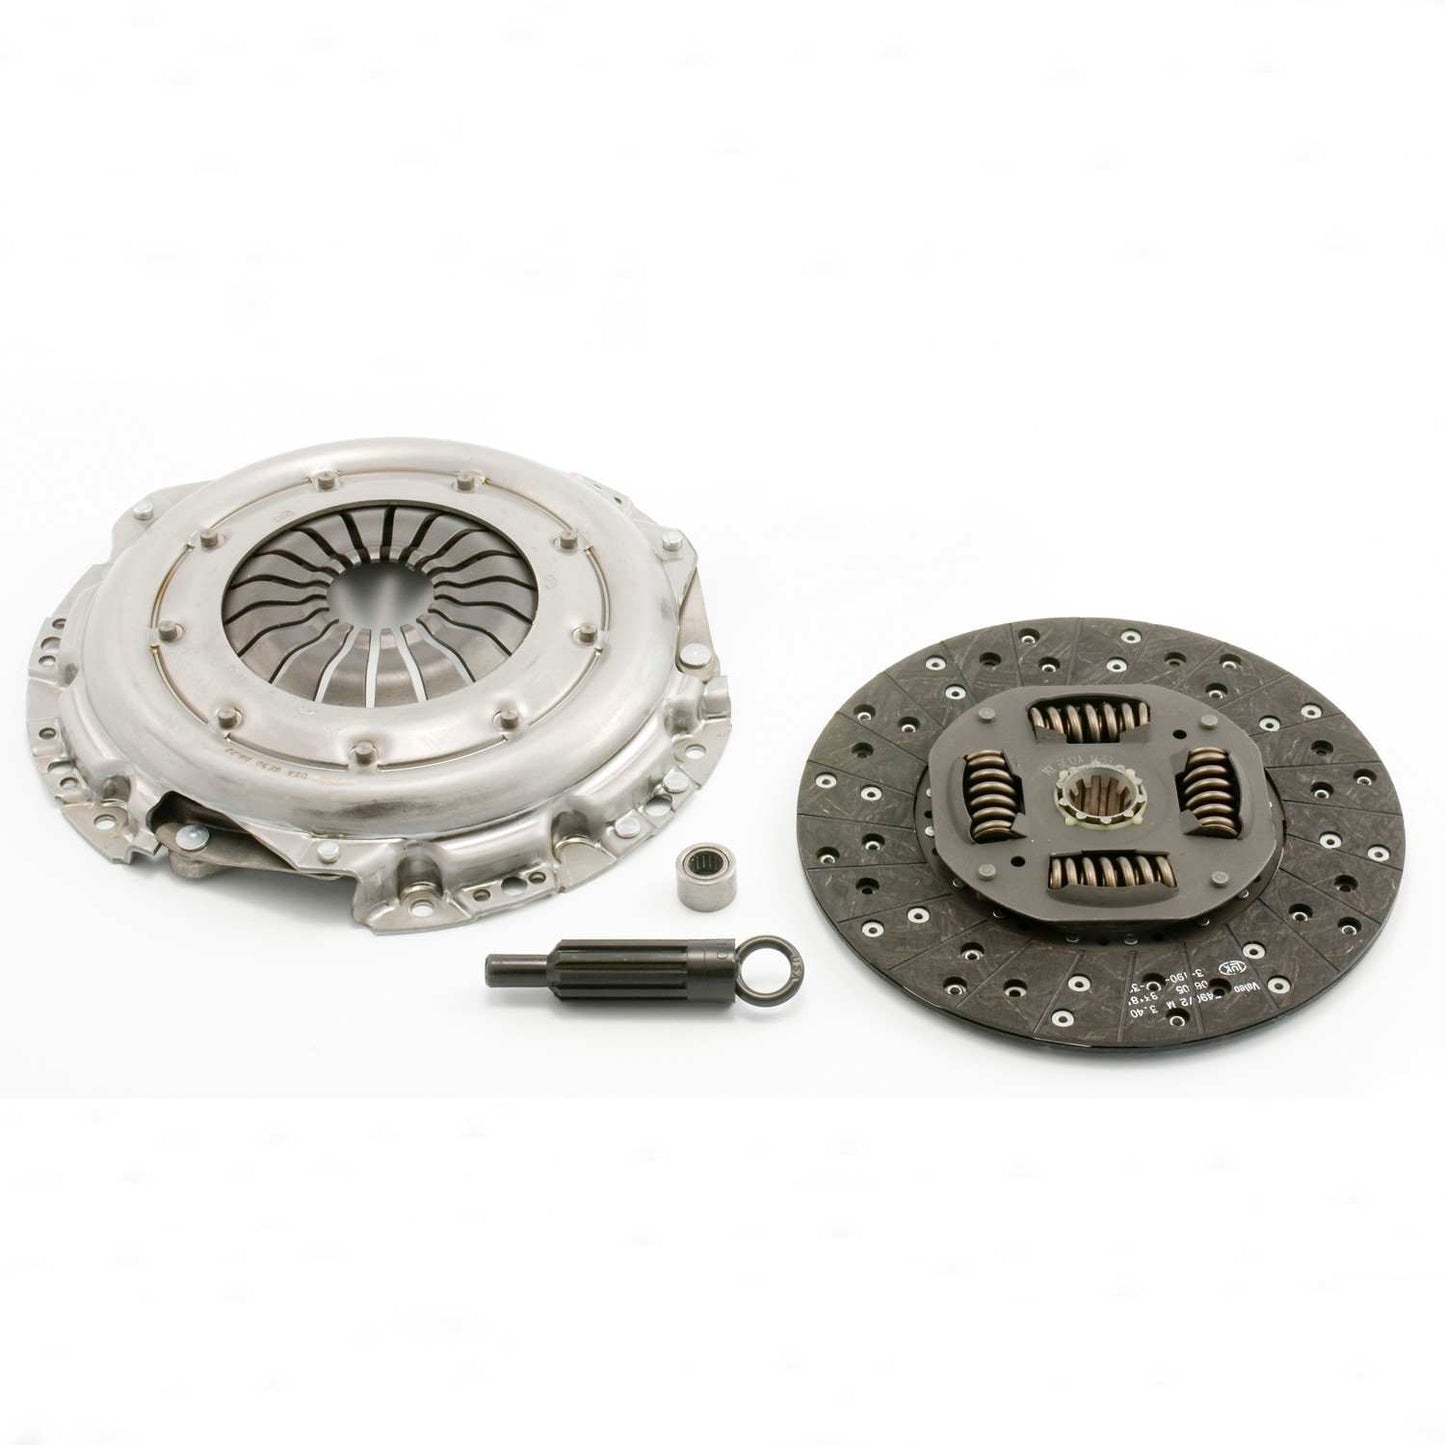 Front View of Transmission Clutch Kit LUK 04-153